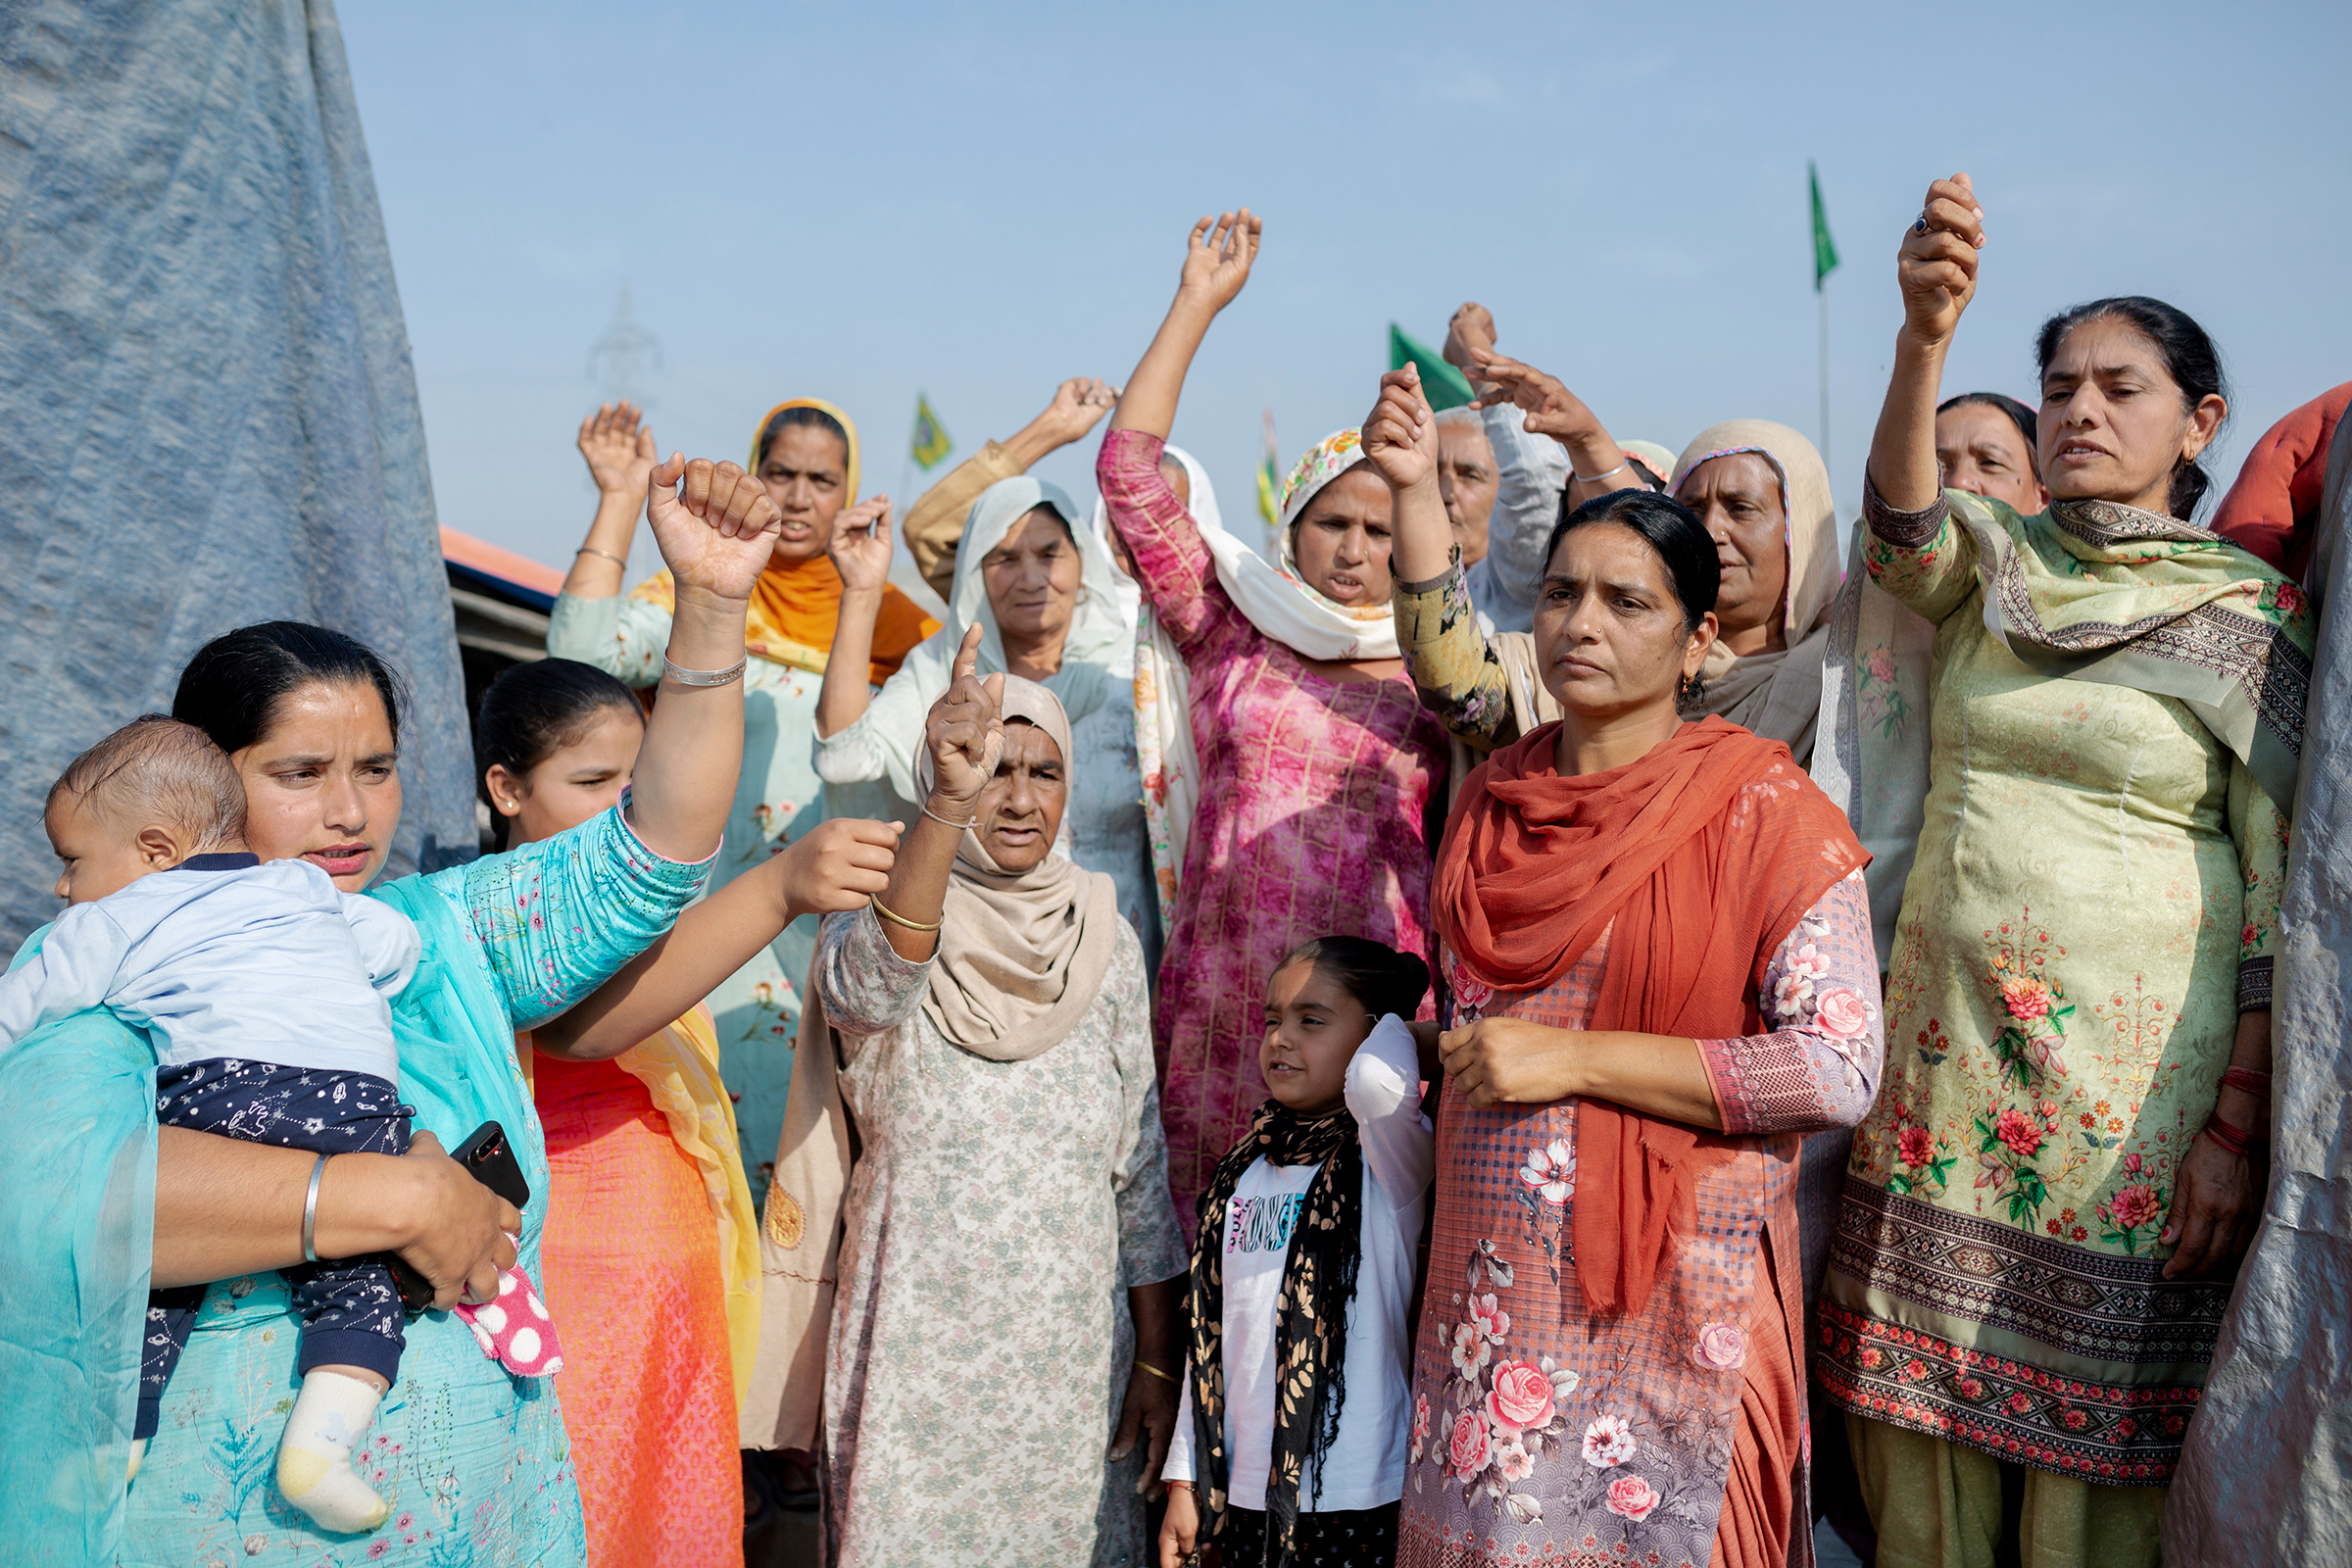 Beginning in November 2020, hundreds of thousands of protesters gathered at sites surrounding the Indian capital to demand the repeal of agricultural laws passed two months earlier by Indian Prime Minister Narendra Modi's government. Kiranjit Kaur, far left, came to the <a href="https://time.com/5942125/women-india-farmers-protests/">Tikri protest site</a> from Talwandi, Punjab, on Feb. 23 with a group of 20 women, including her mother-in-law and children. “It is important for all women to come here and mark their presence in this movement," she said. "I have two daughters, and I want them to grow up into the strong women they see here.” A year after protests started, Modi pledged the laws would be repealed. (Kanishka Sonthalia for TIME)